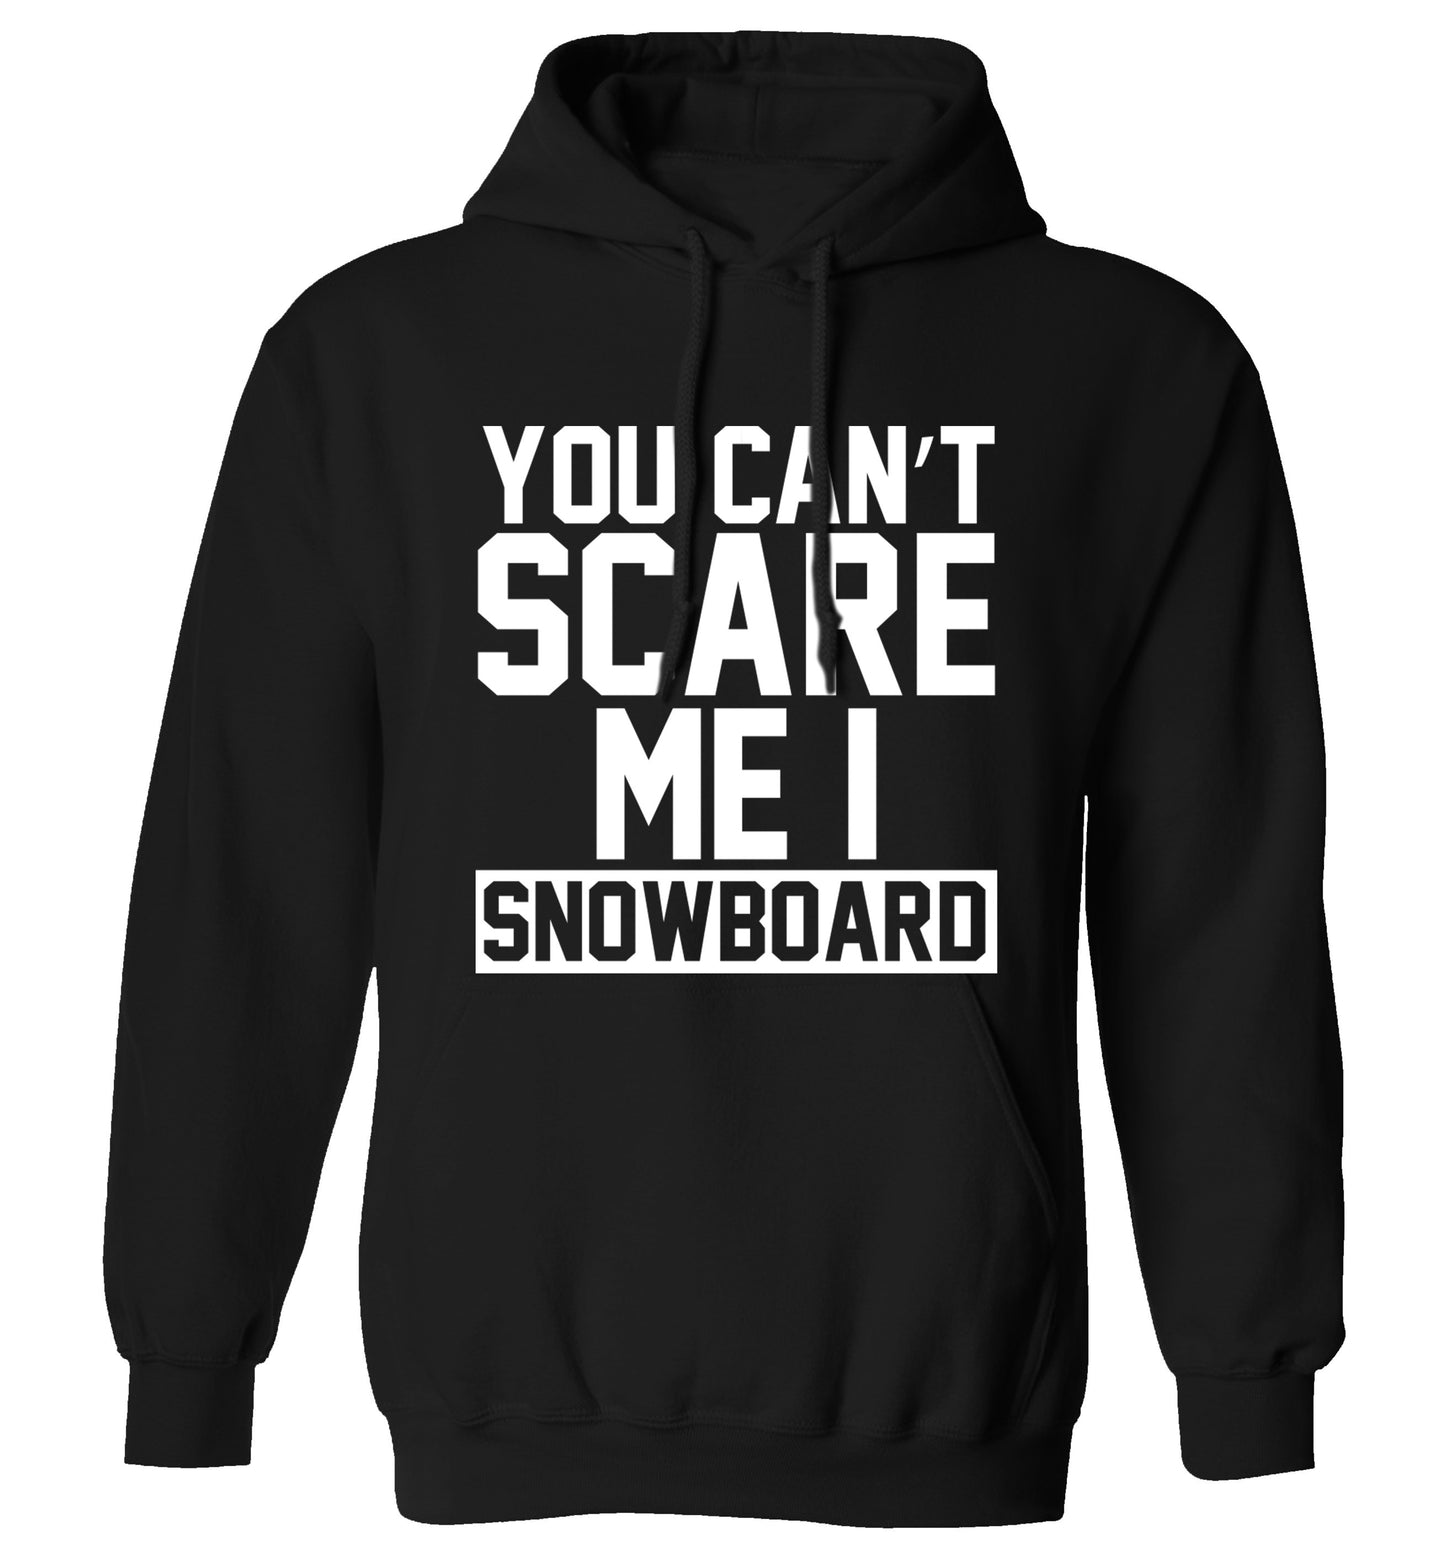 You can't scare me I snowboard adults unisex black hoodie 2XL